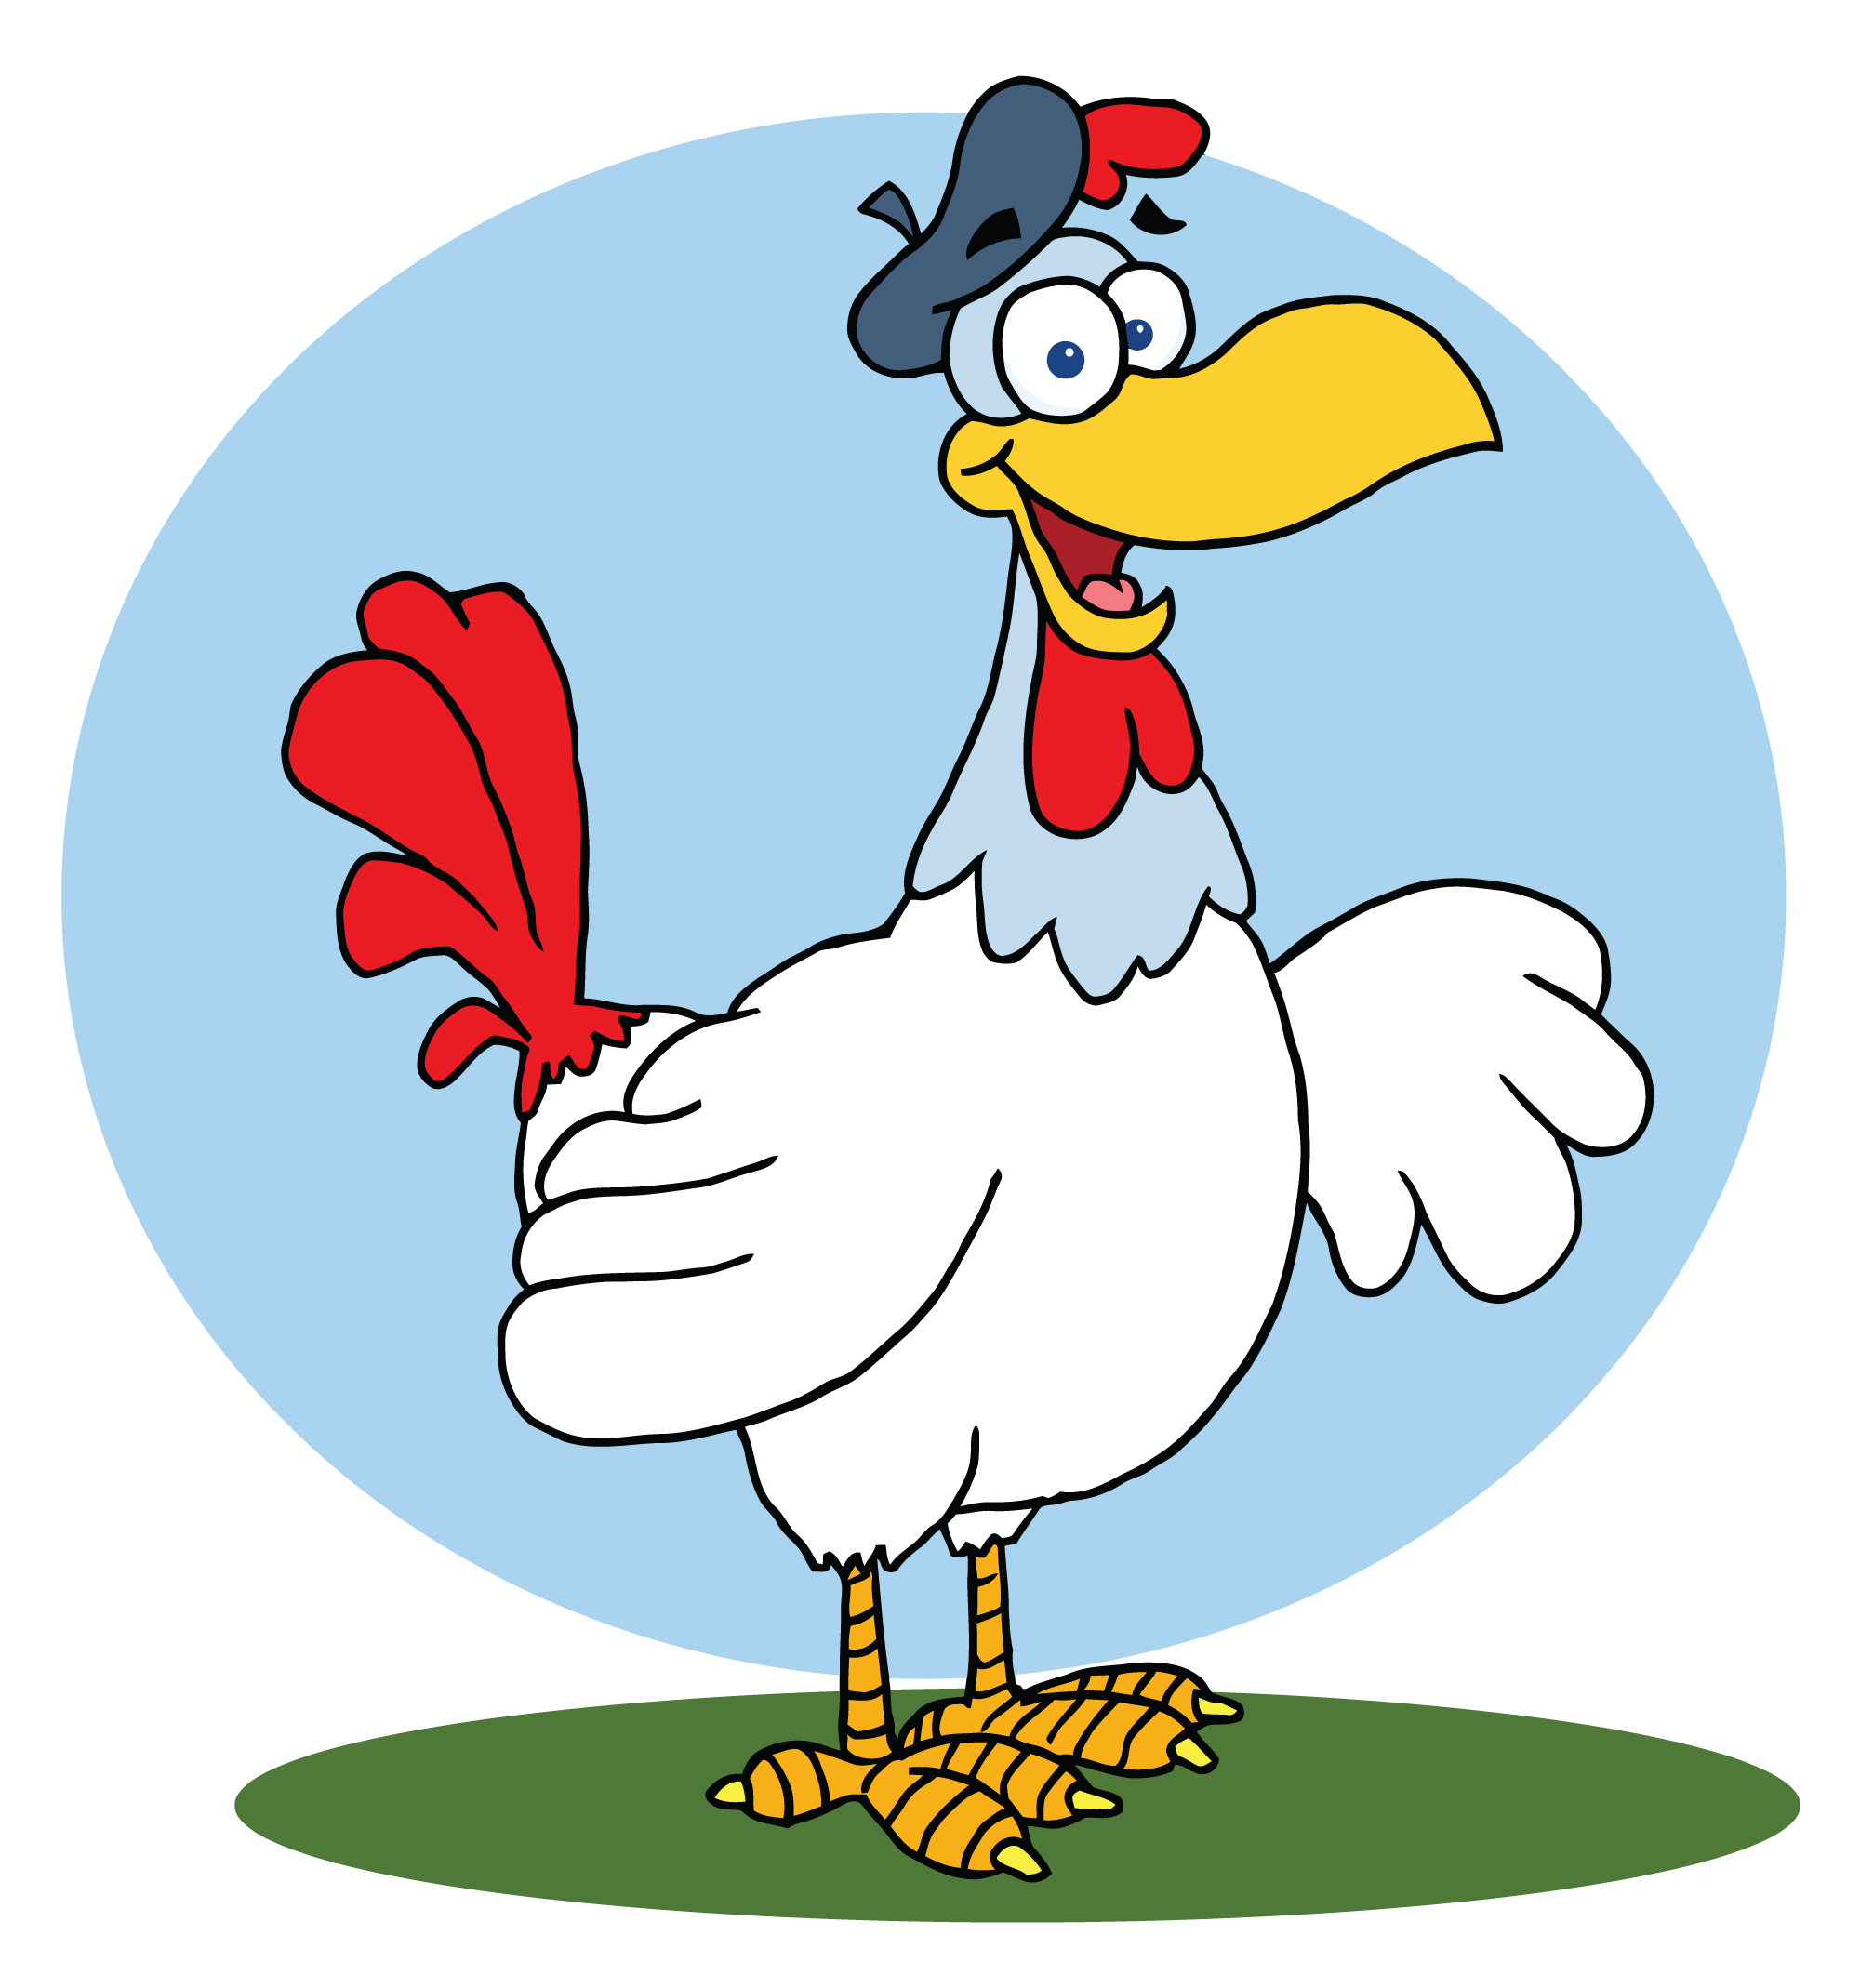 Chicken Cartoon Wallpapers HD | Download High Quality Resolution 